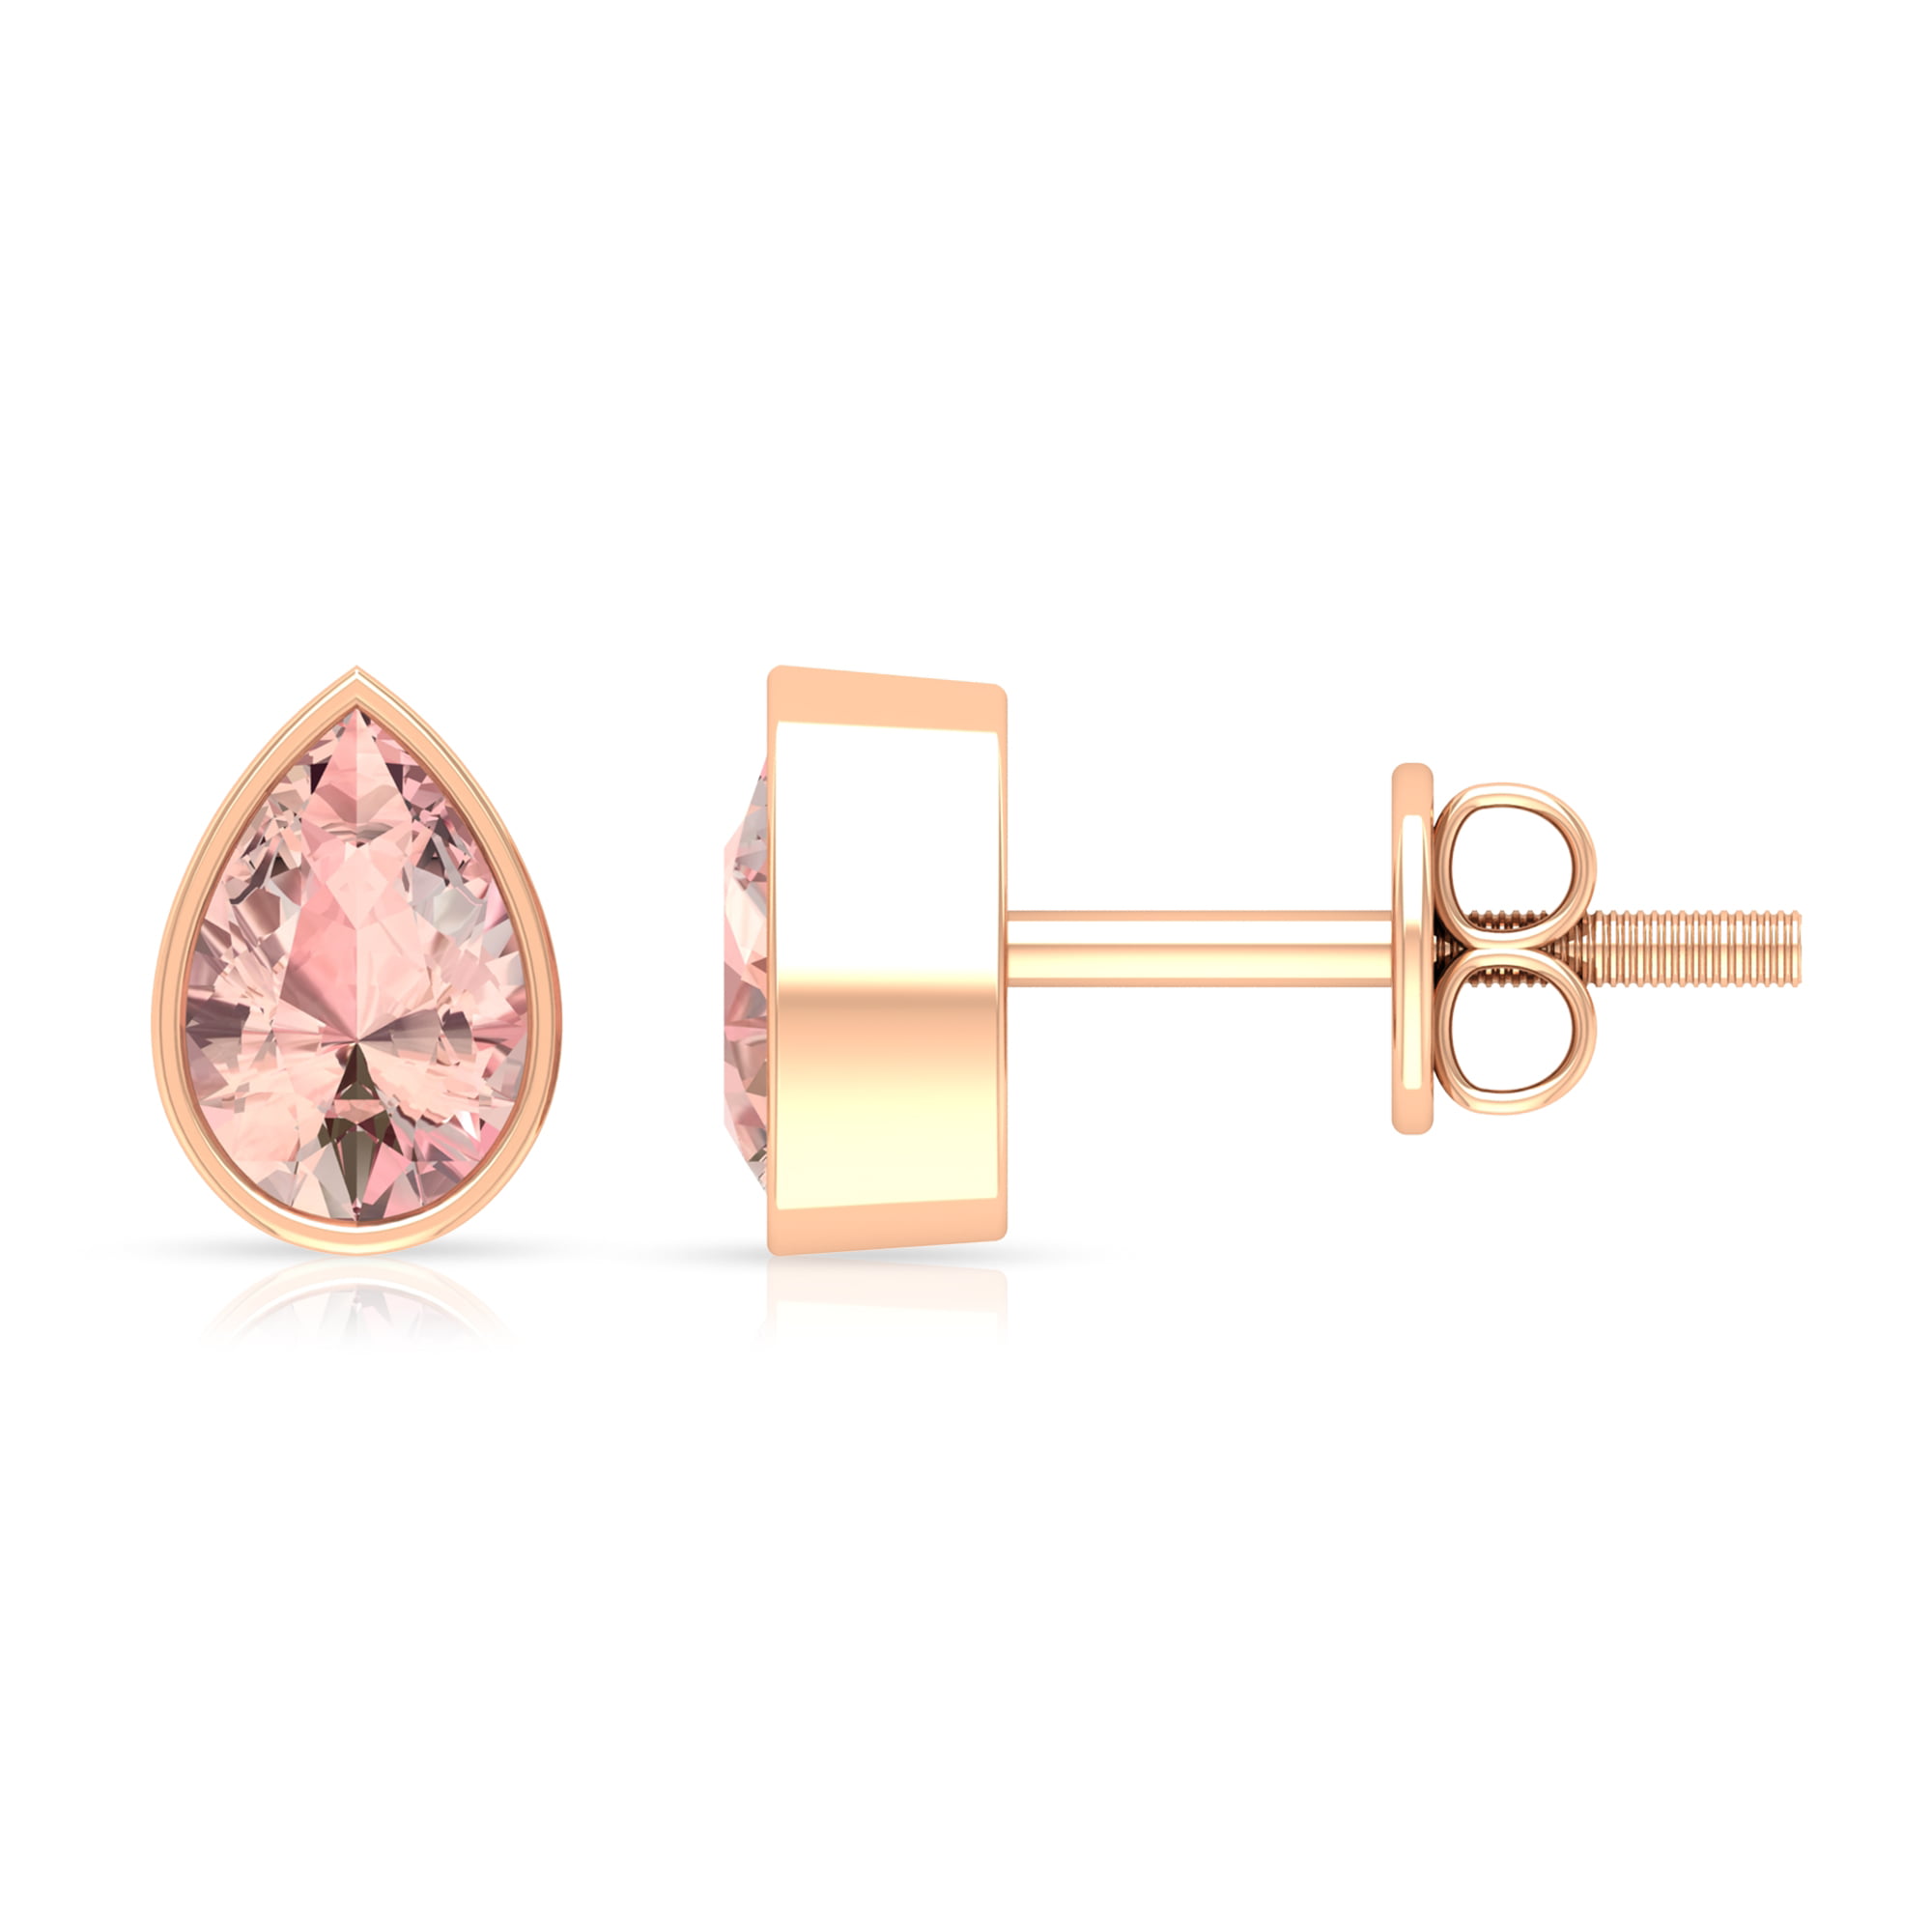 Details about   6Ct Pear Cut Pink Morganite Simulant Diamond Stud Earrings White Gold Fns Silver 